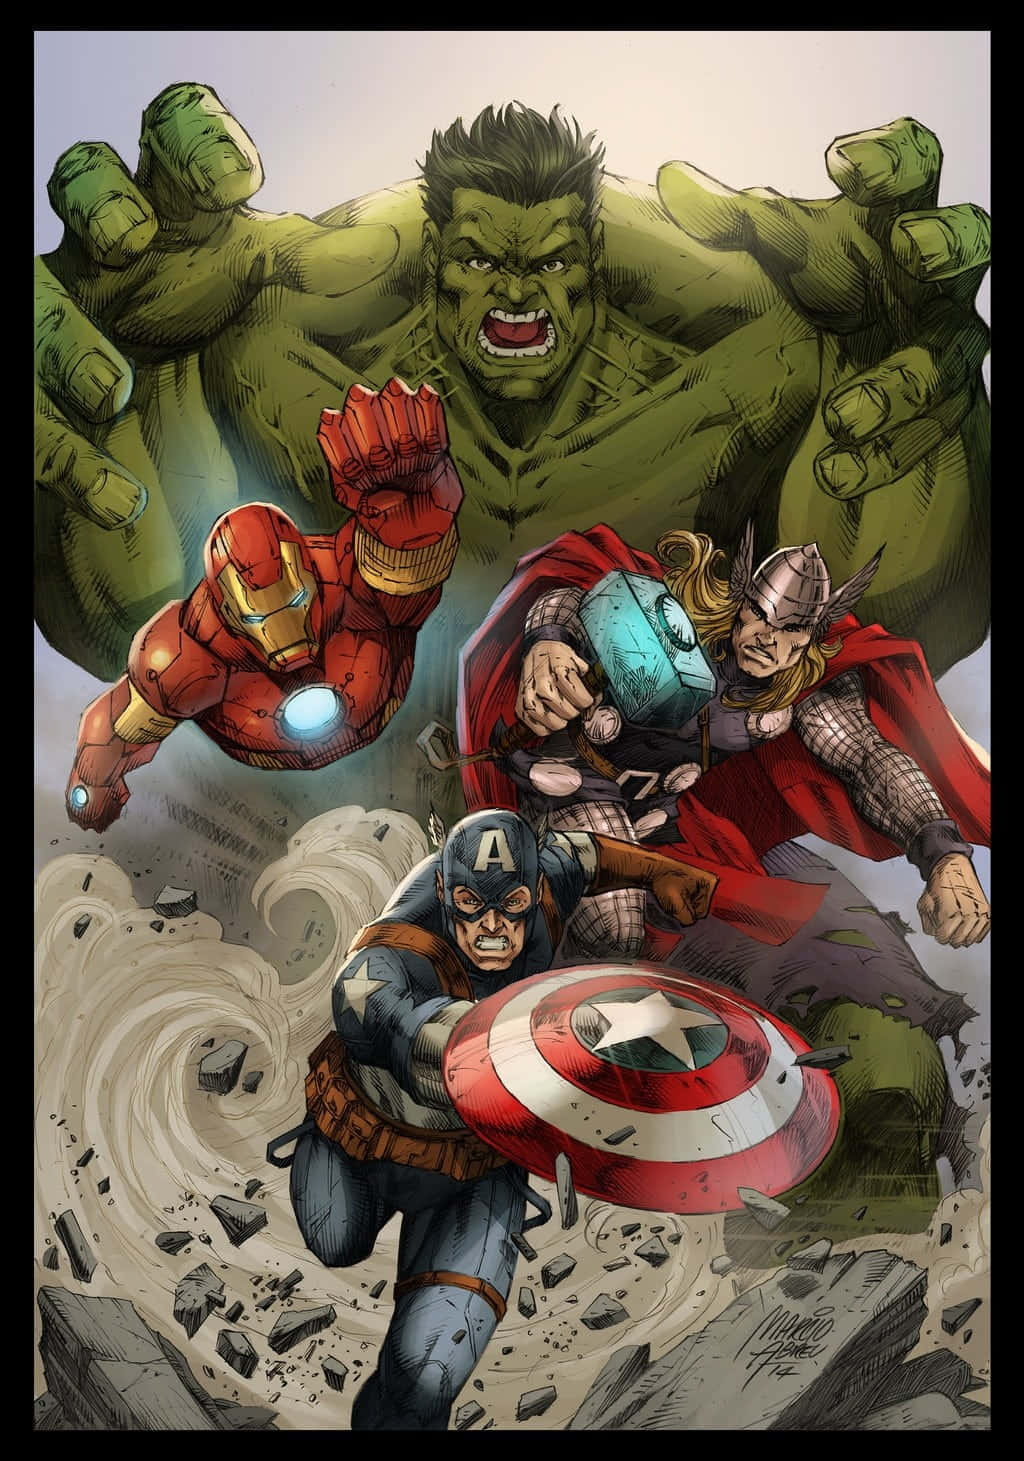 Celebrate Your Fandom for Marvel and DC with an iPhone! Wallpaper